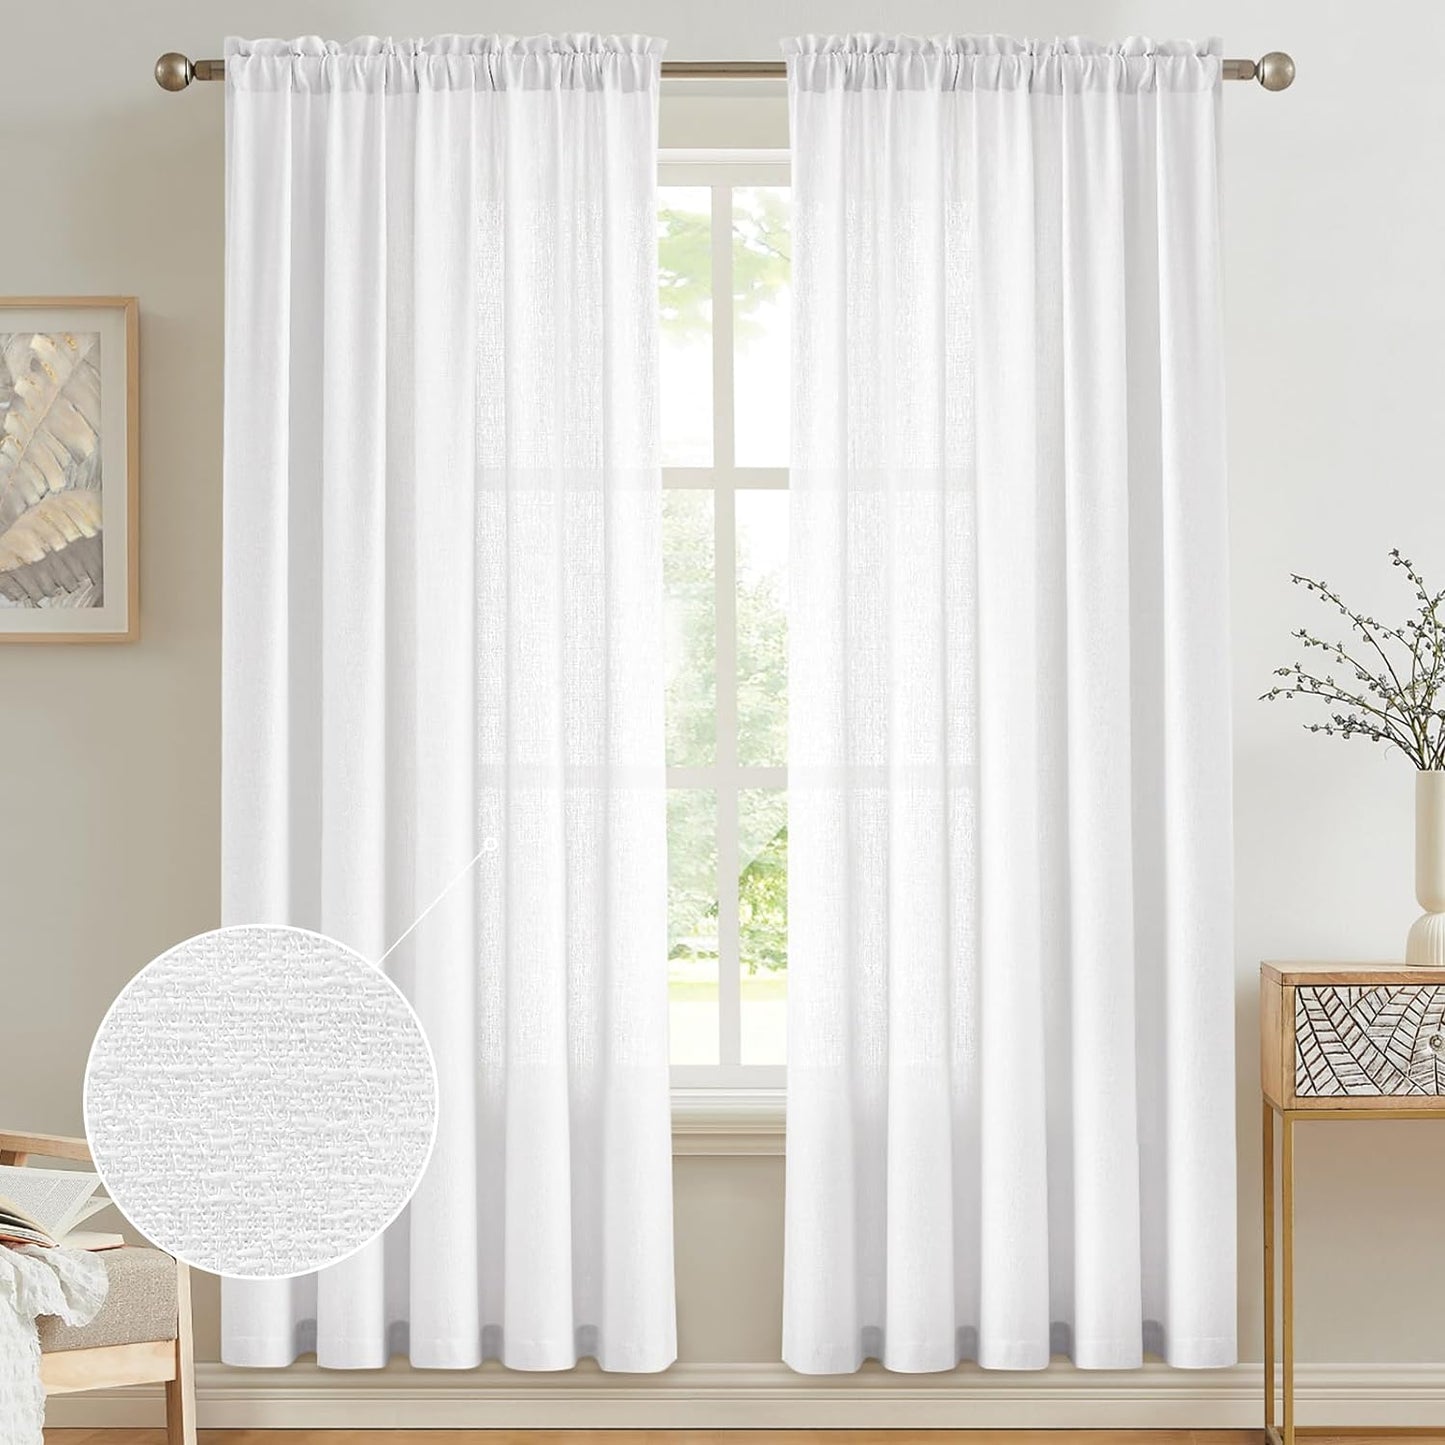 Anpark White Semi Sheer Curtains Linen Rod Pocket Curtains Tiebacks Included Semi Sheers, Privacy & Serenity for Bedroom, Soft Light for Relaxation - 52" W X 84" L, 2 Panels  Anpark White 52X84 Inch 